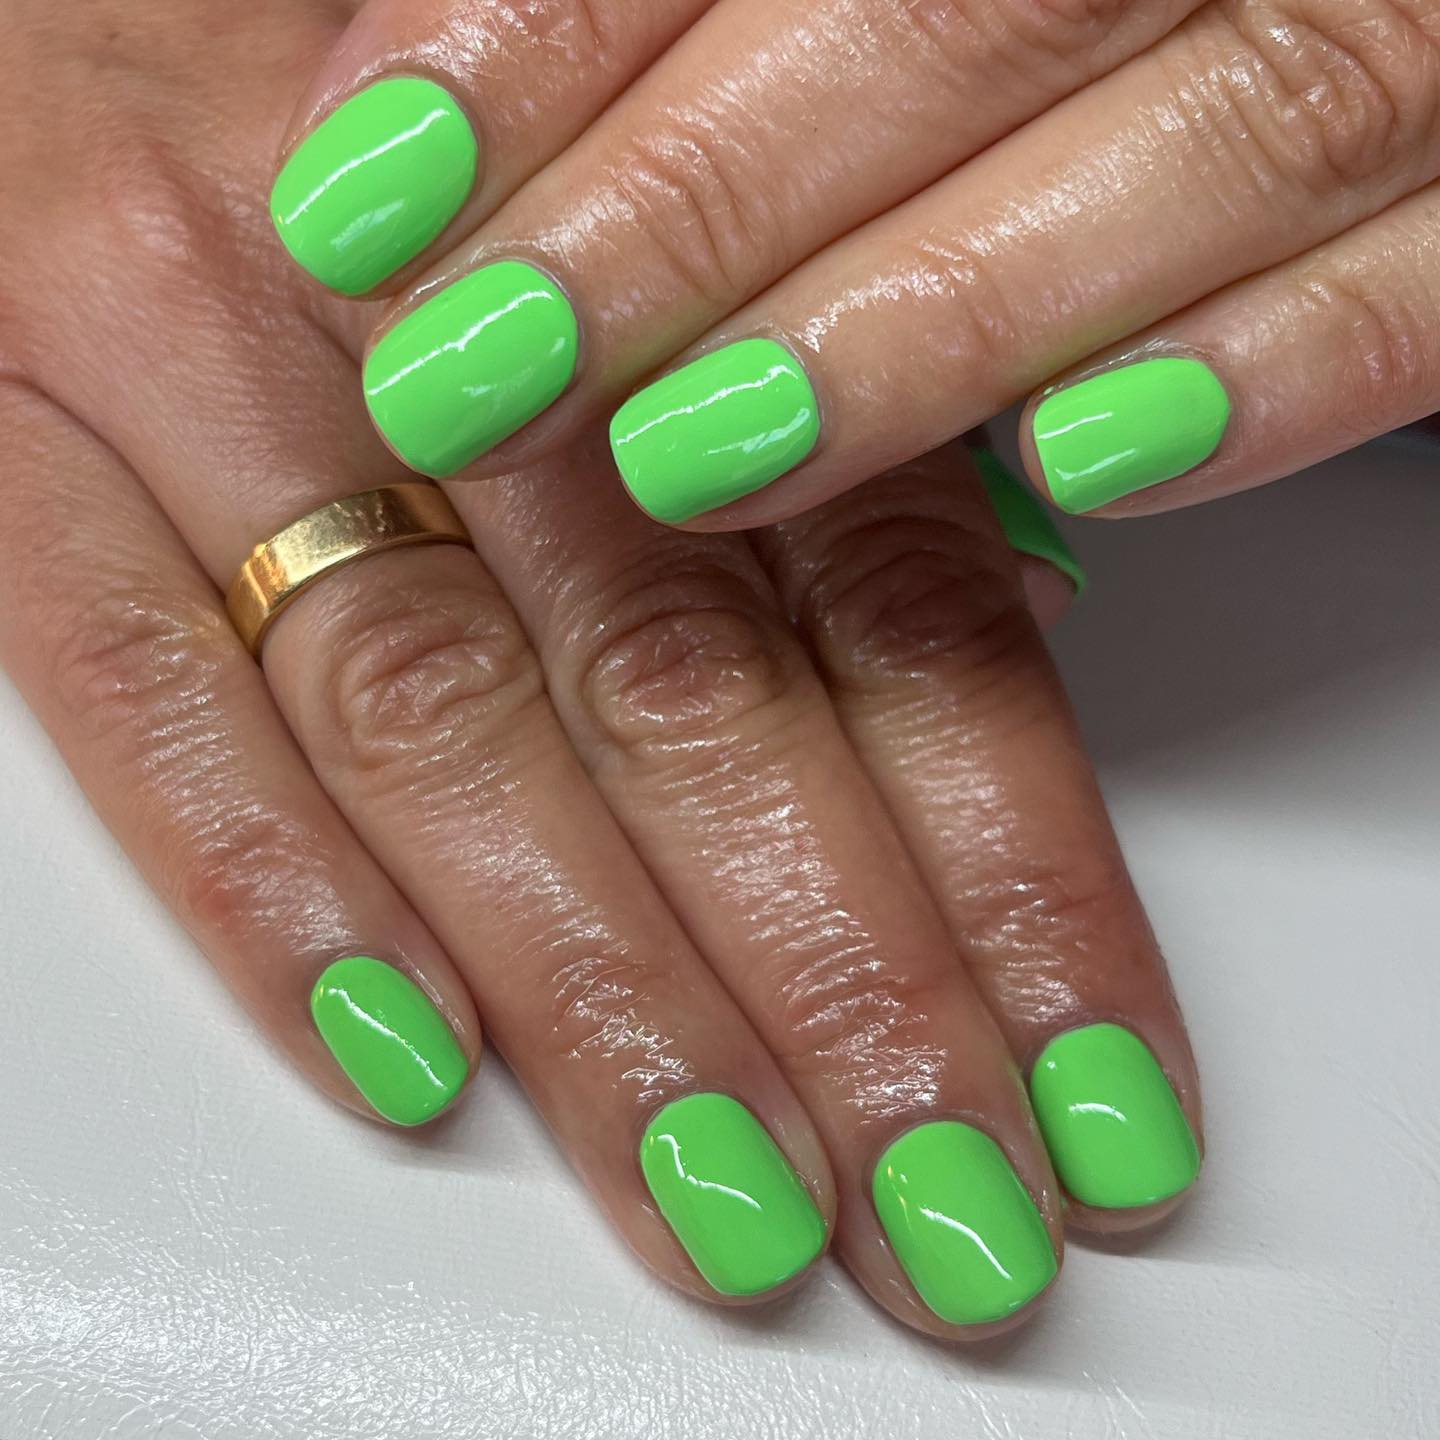 Neon nails are great if you want a bright accent nail or if you just really love bright colors. Green neon polish means you're so fun and energetic. If you are a person who loves the color of nature, give it a shot.